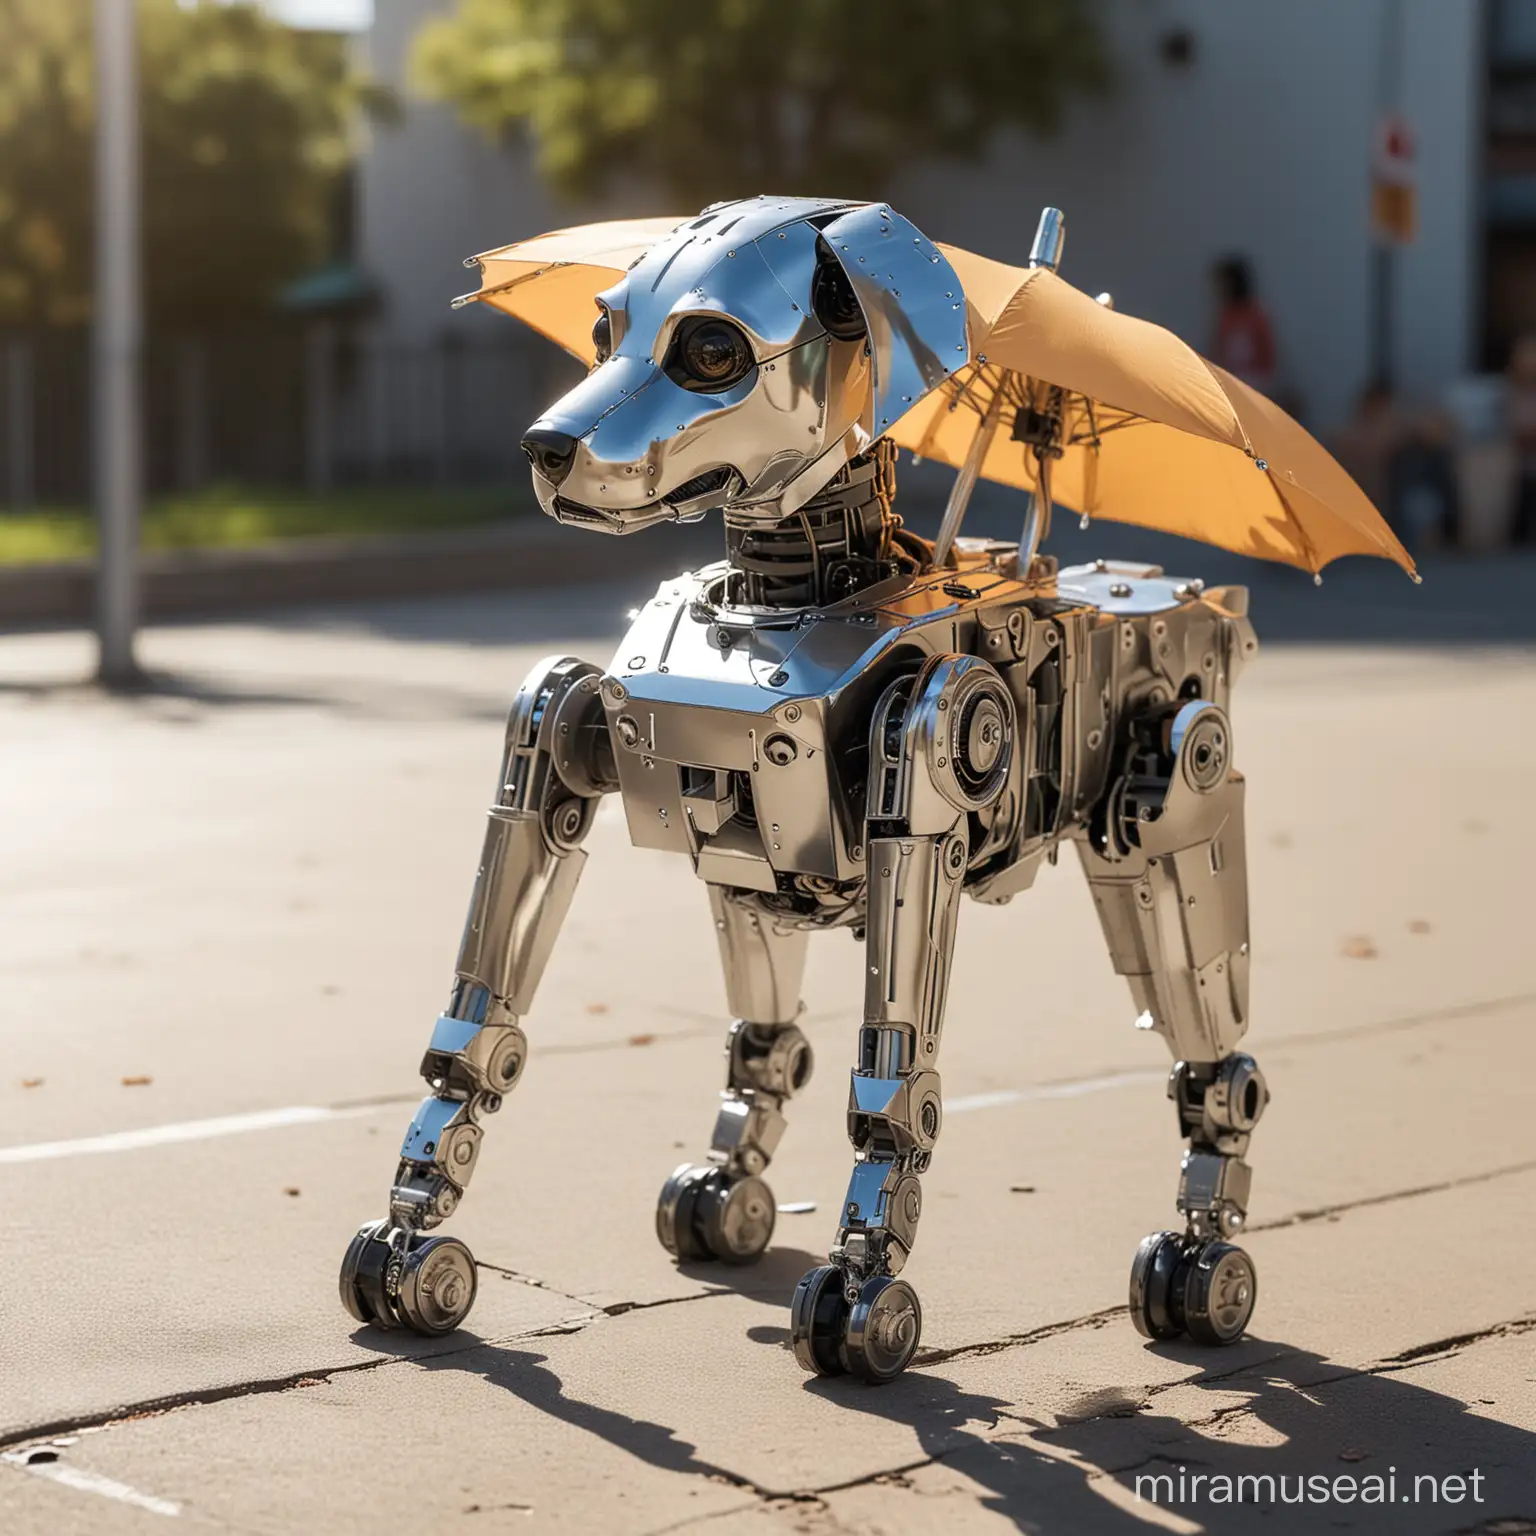 Sunny Day Pneumatic Robot Dog Stroll with Umbrella